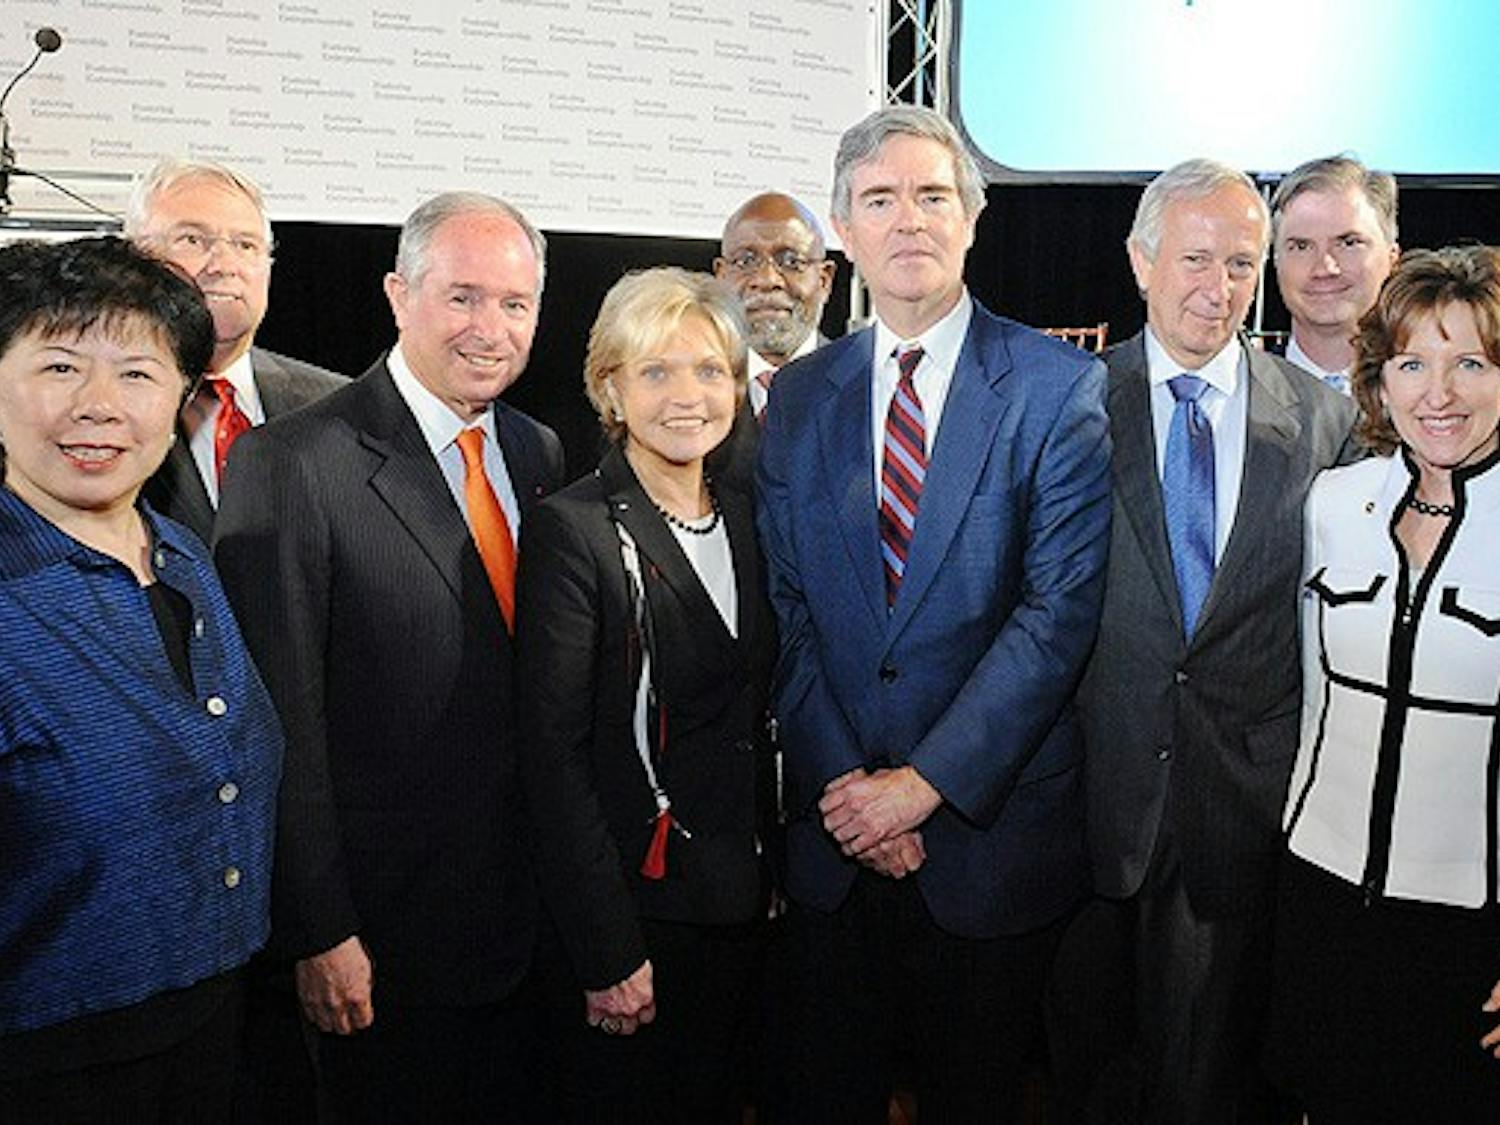 National, state and local university leaders pose at the launch of the Blackstone Entrepreneurs Network at the American Tobacco Campus Monday.